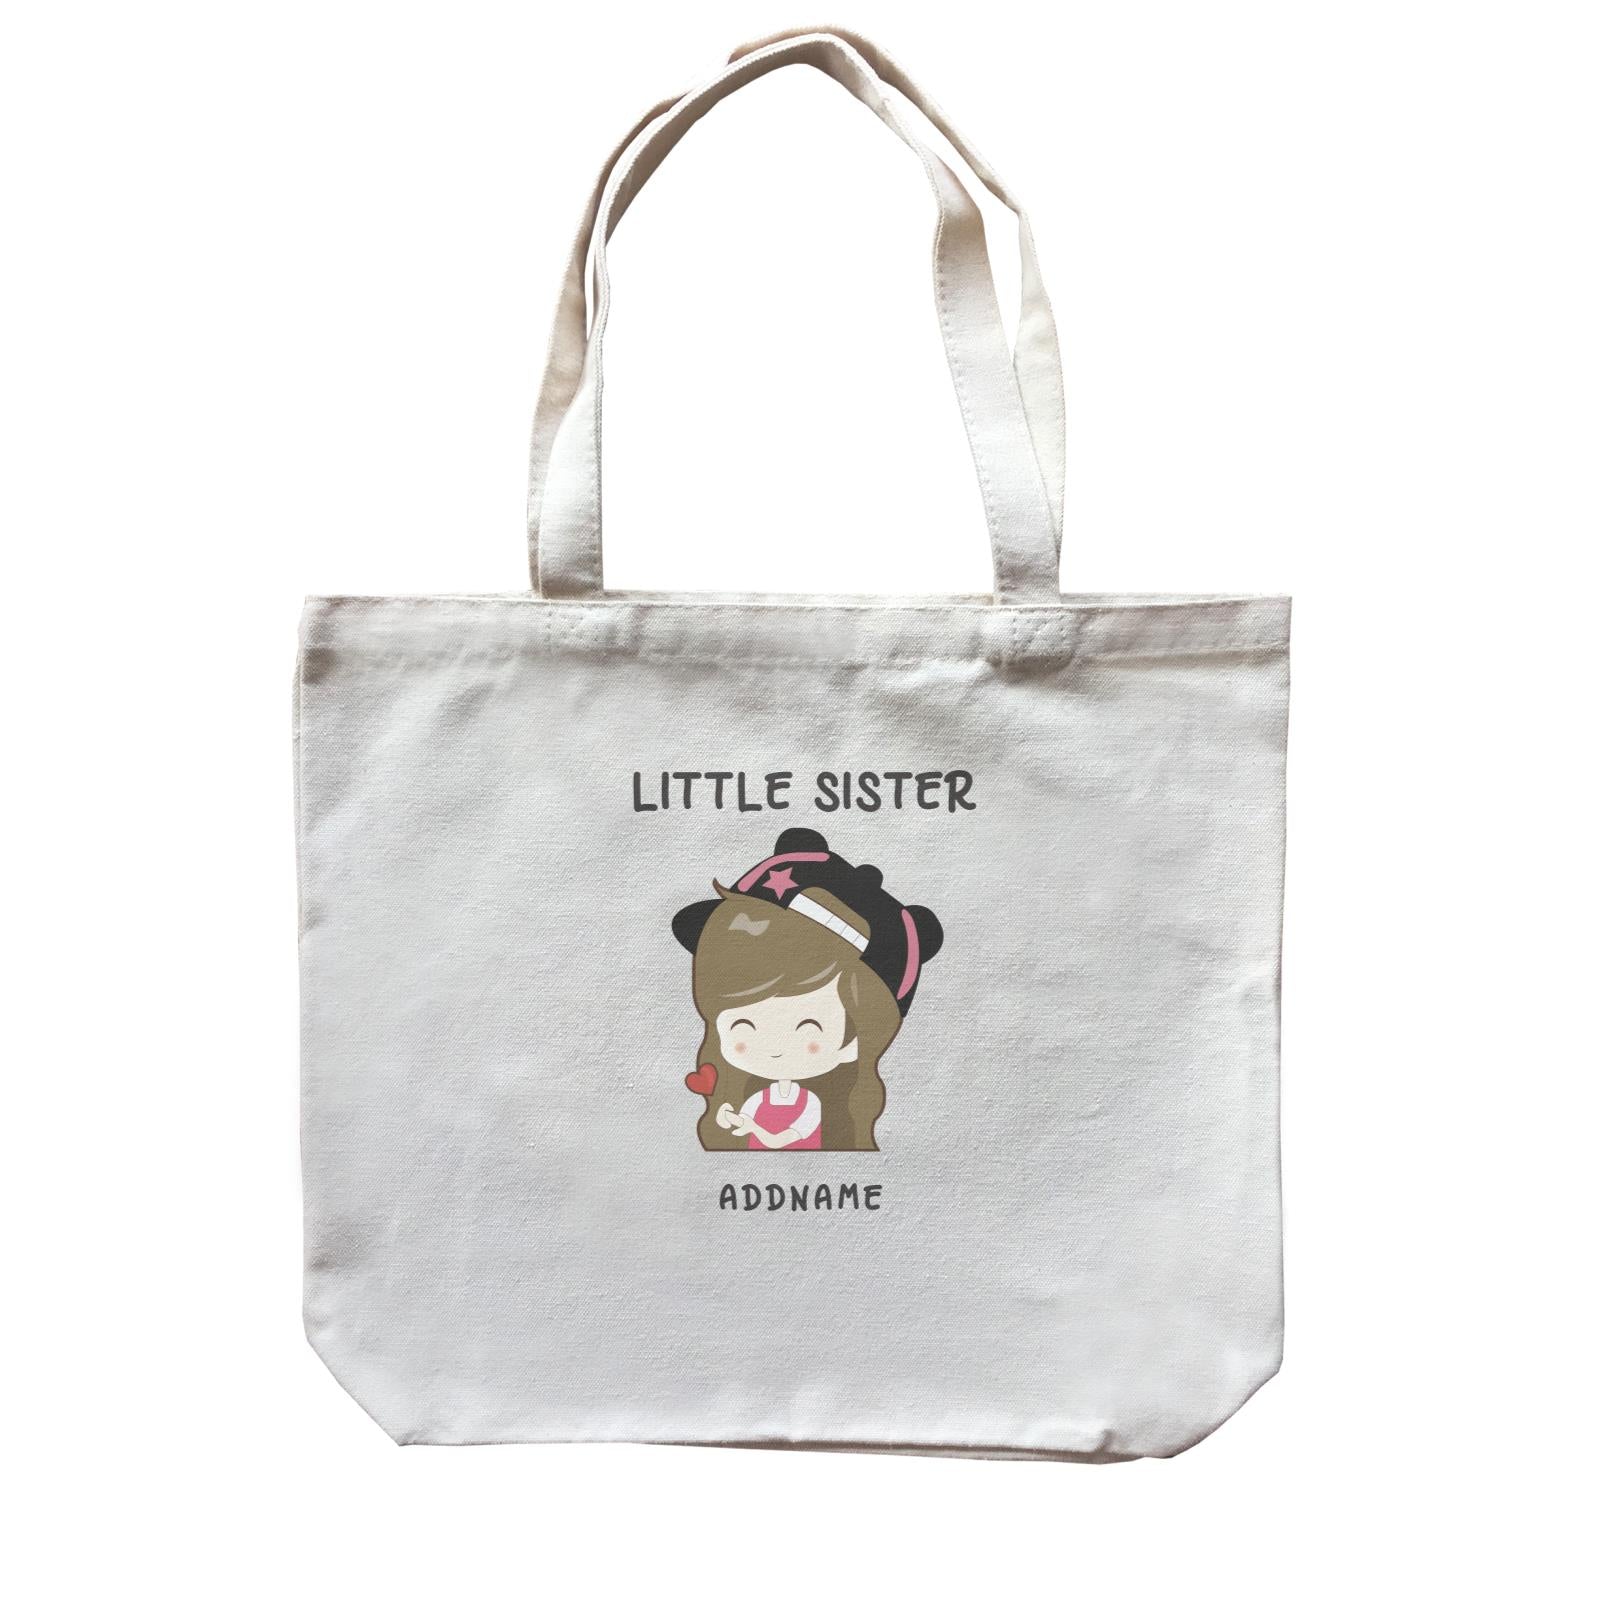 My Lovely Family Series Little Sister Addname Canvas Bag